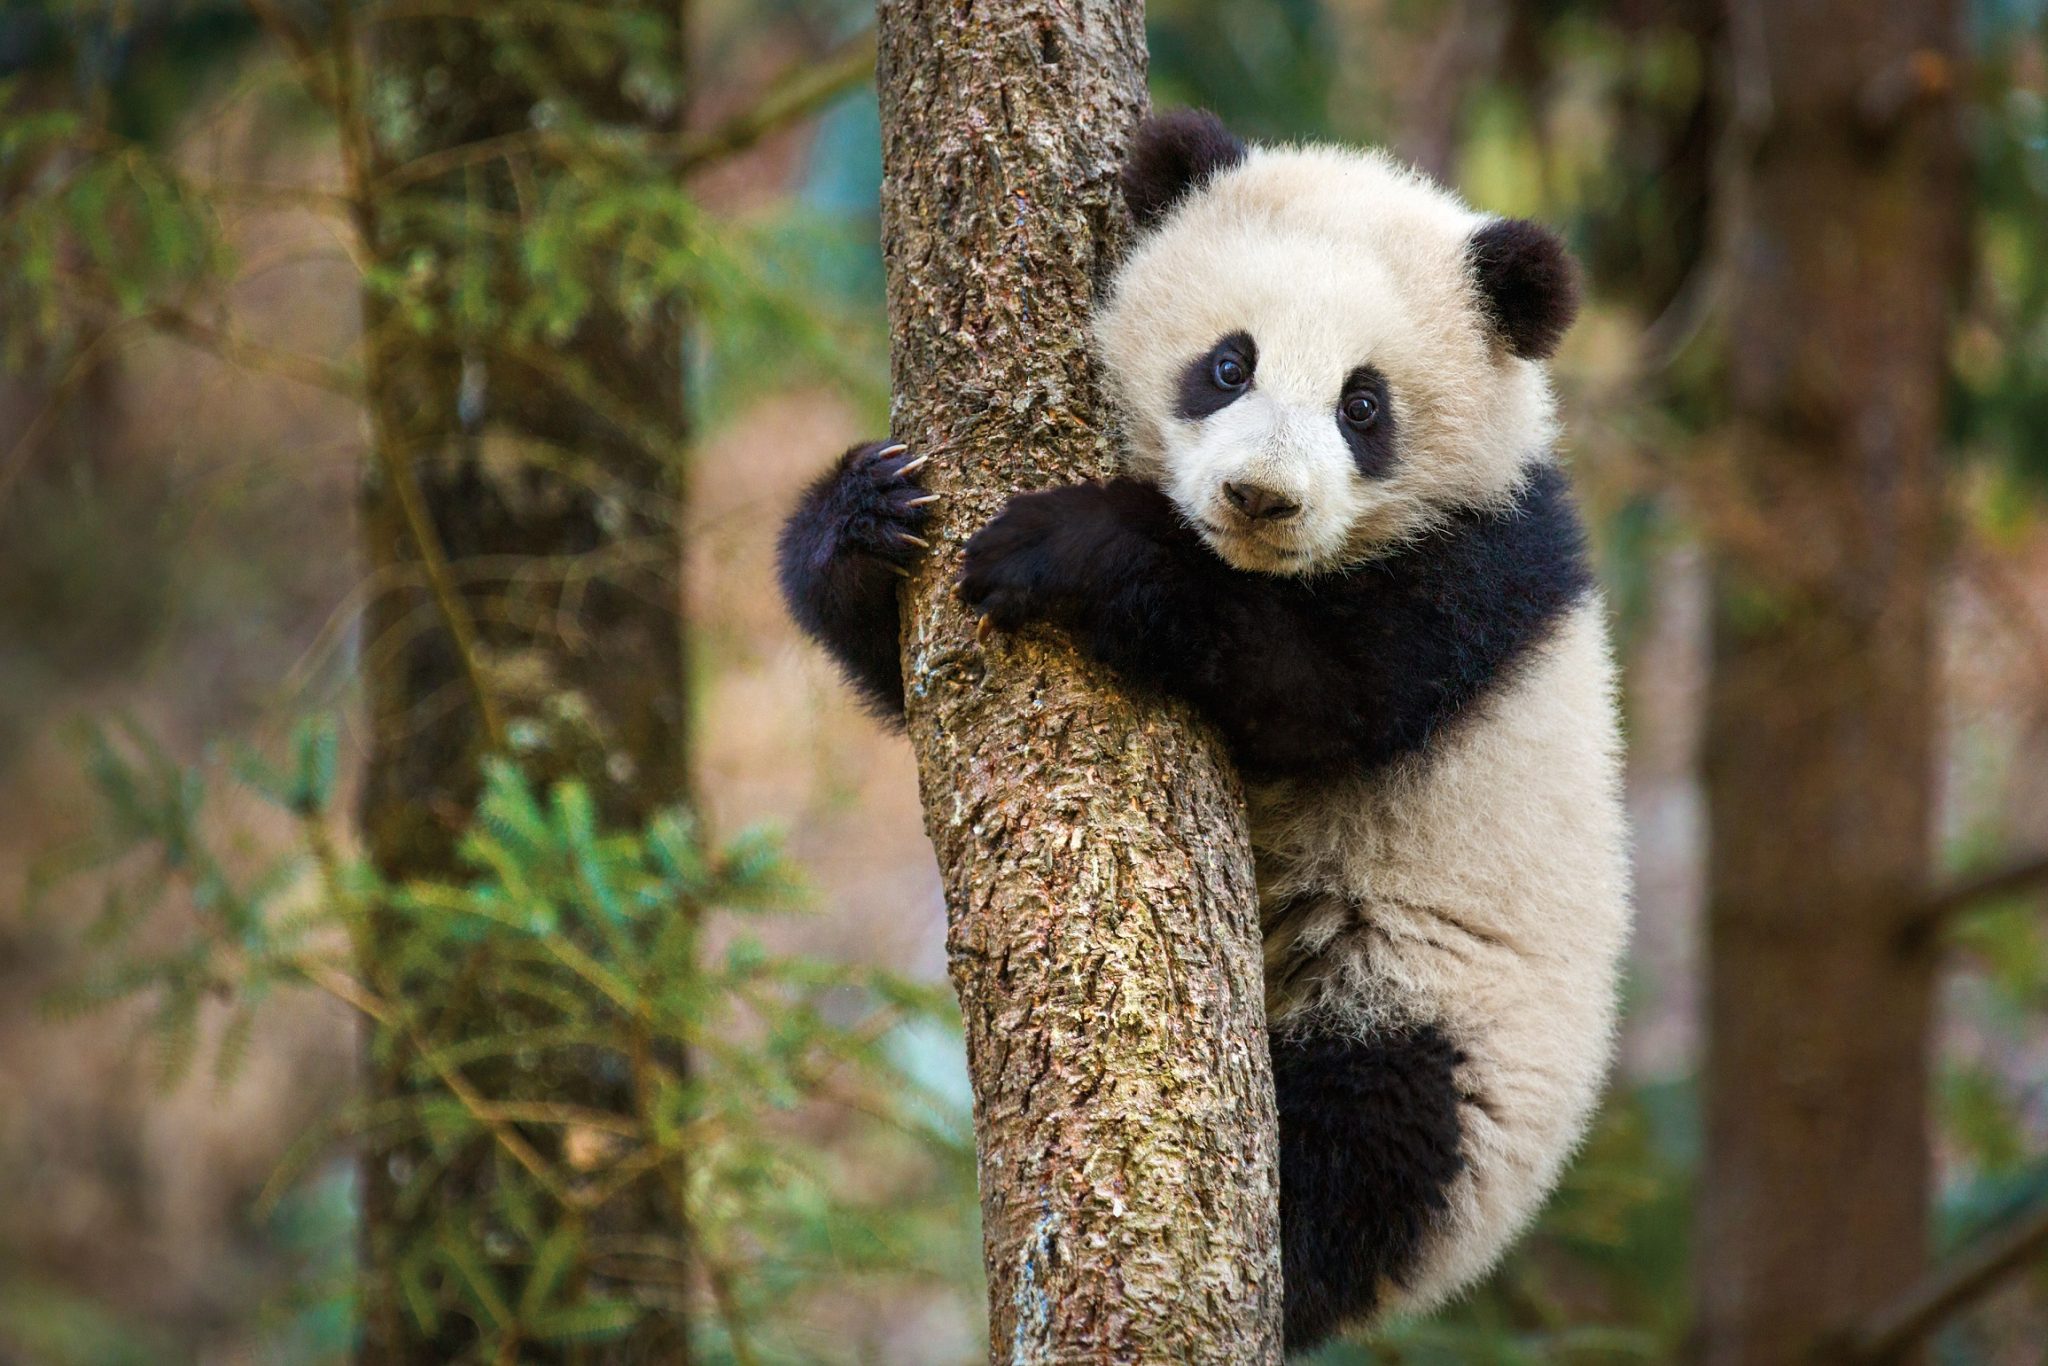 DisneyNature’s True Life Adventure film ‘Born in China’ Heading to Theaters Spring 2017